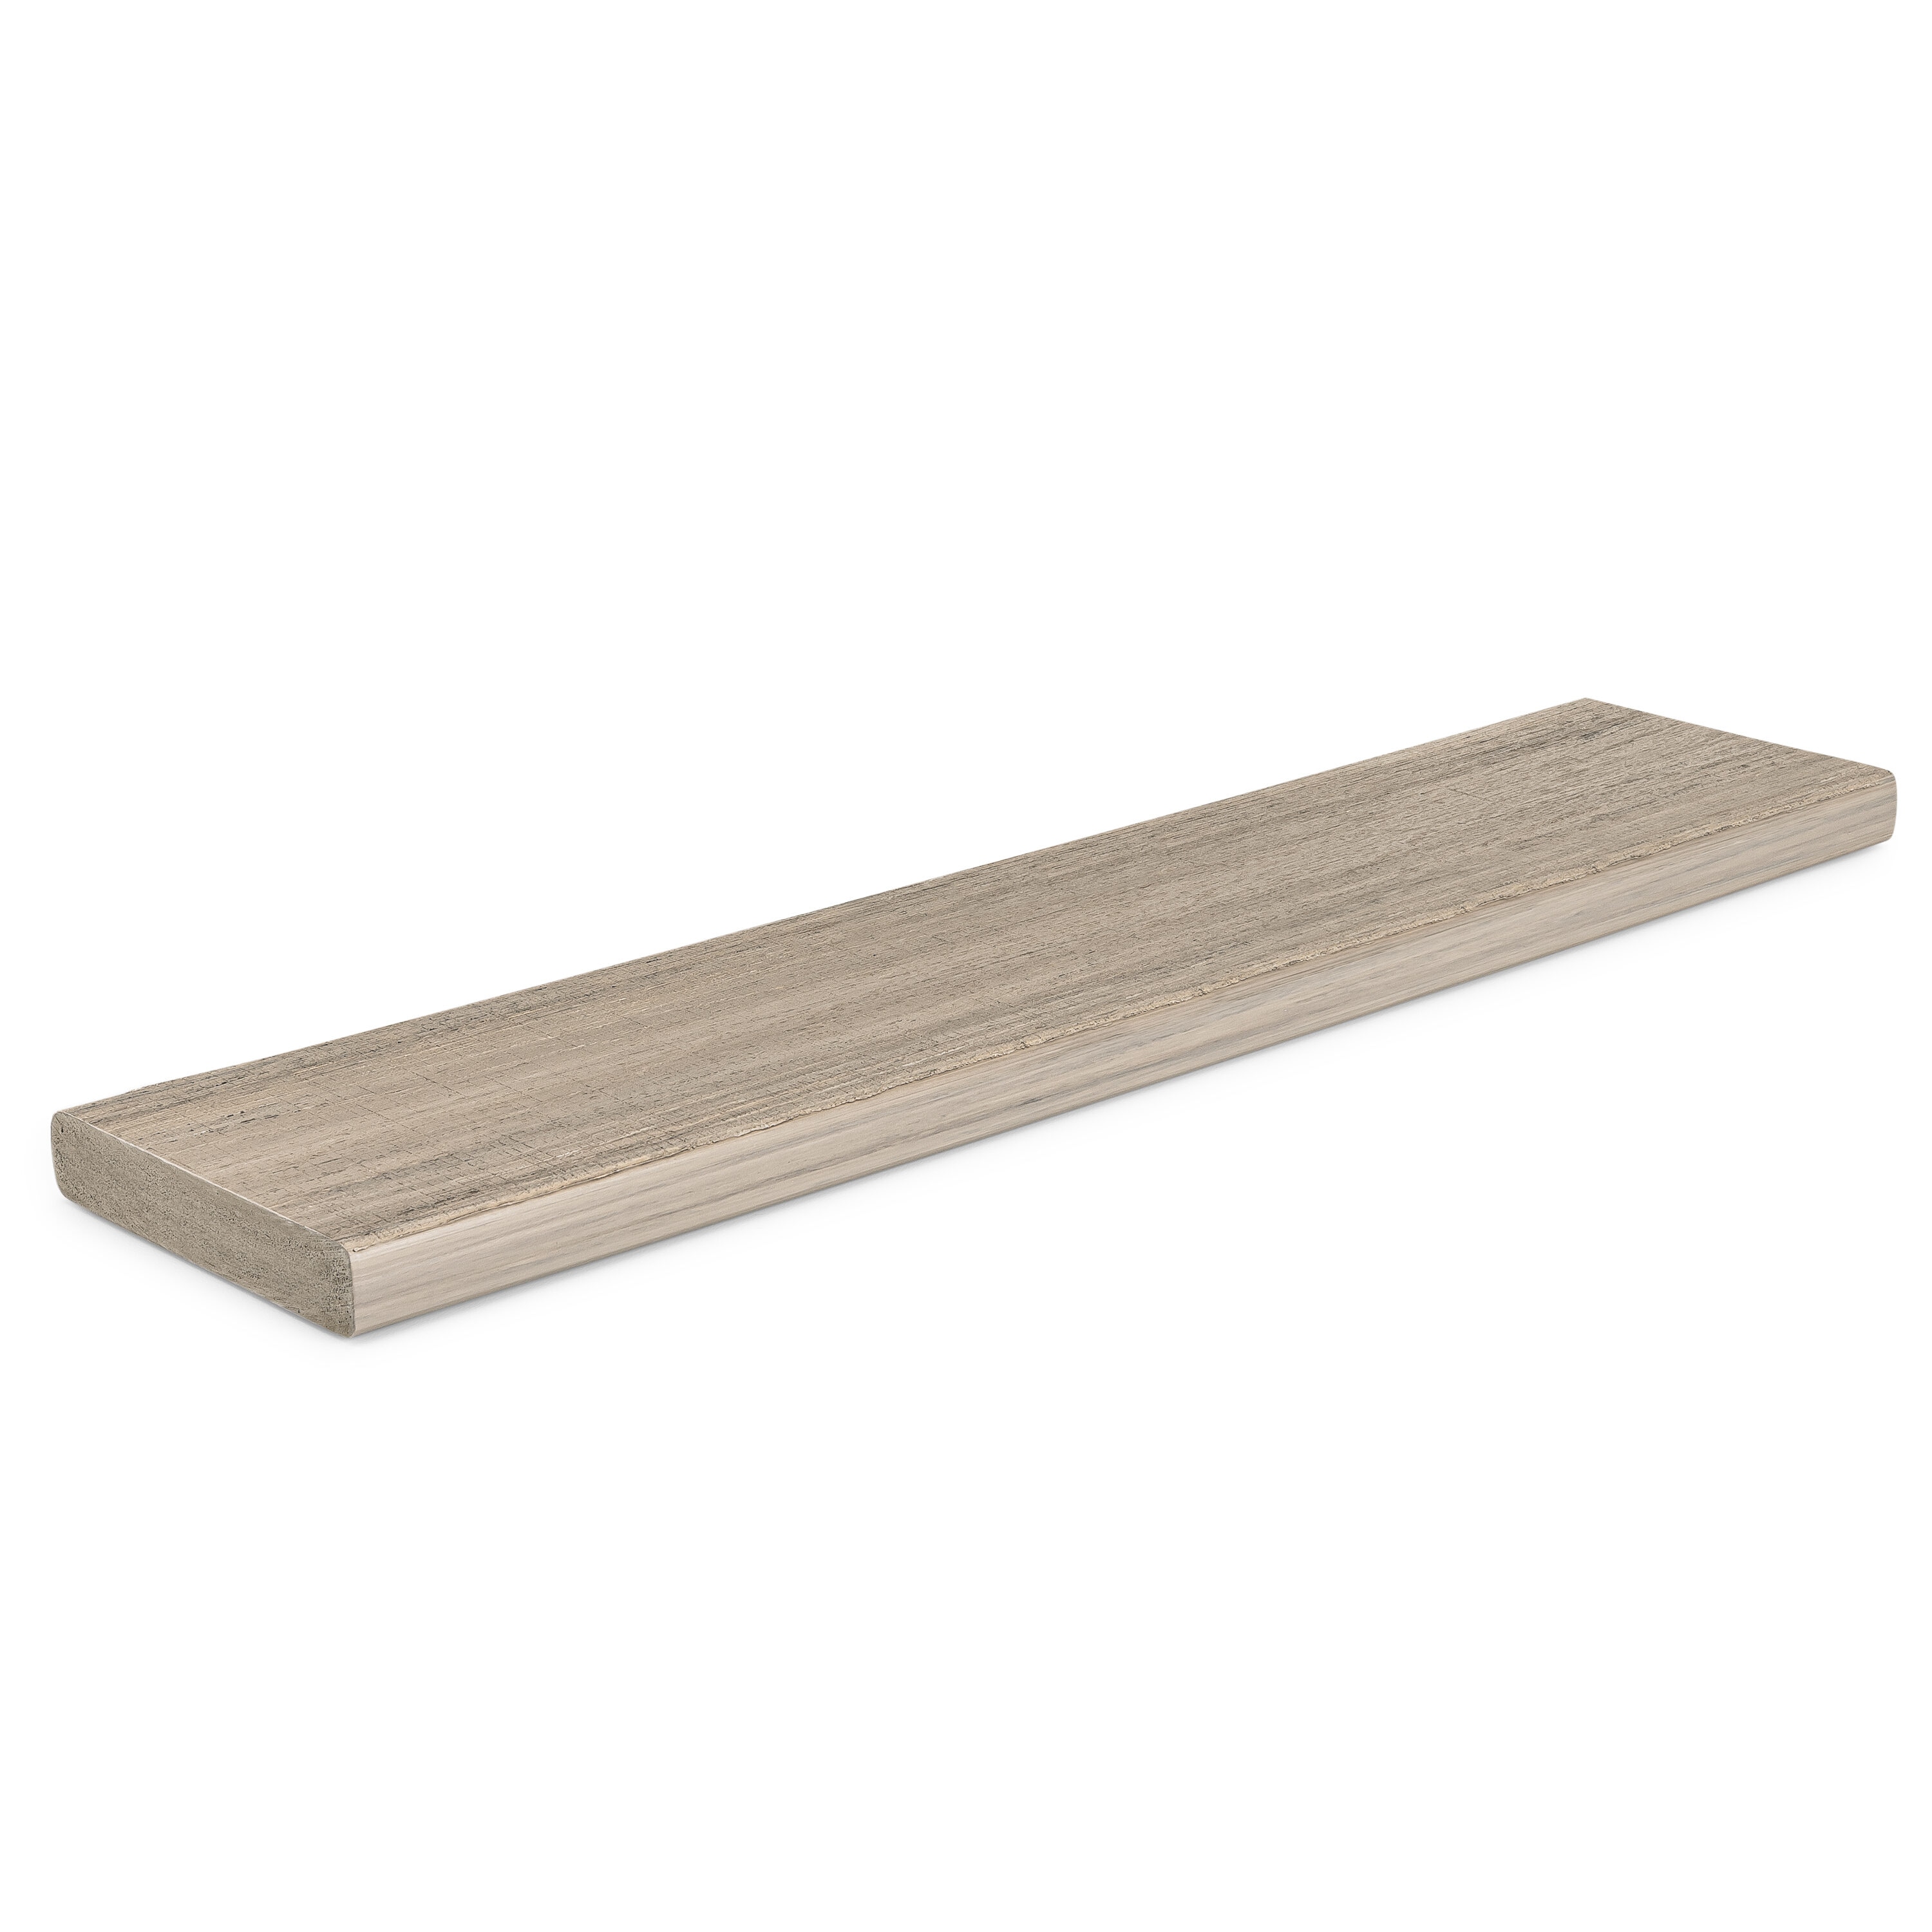 Landmark 5/4-in x 6-in x 16-ft French White Oak Grooved Composite Deck Board in Brown/Tan | - TimberTech AGB15516FW